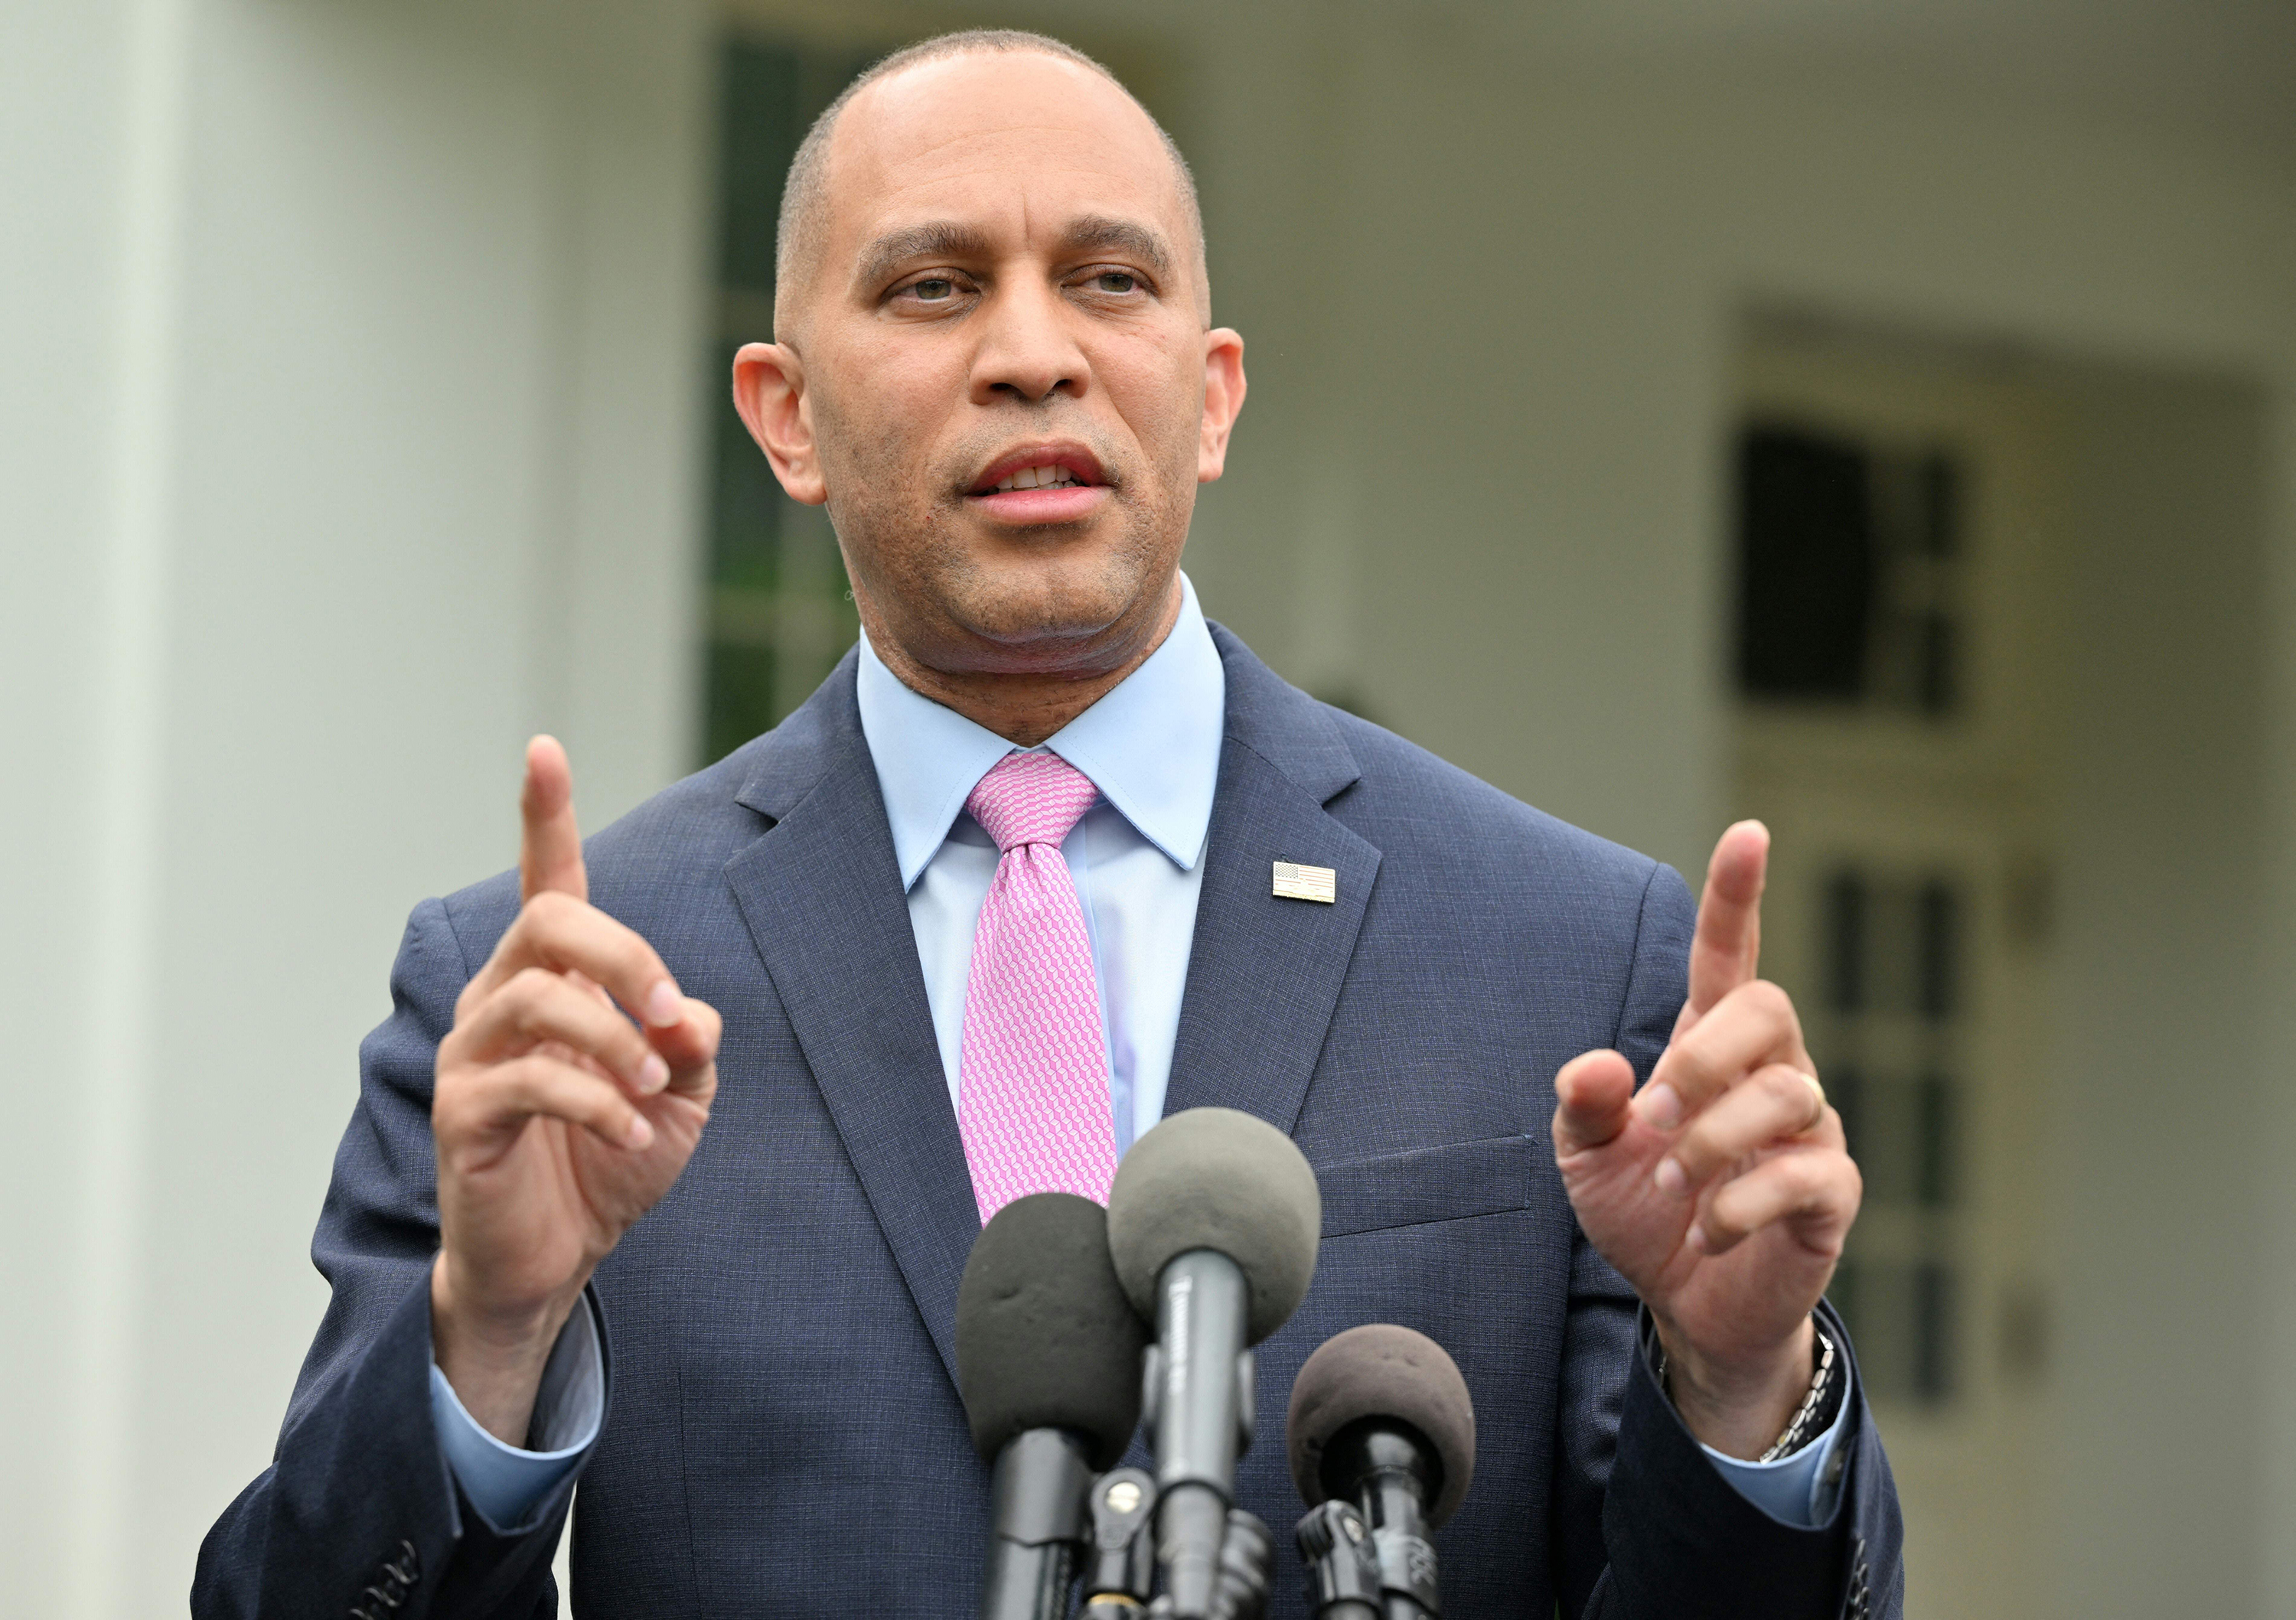 House Minority Leader Hakeem Jeffries (D-NY) speaks to members of the media following a meeting on the debt limit with President Joe Biden at the White House in Washington, DC, on May 16.